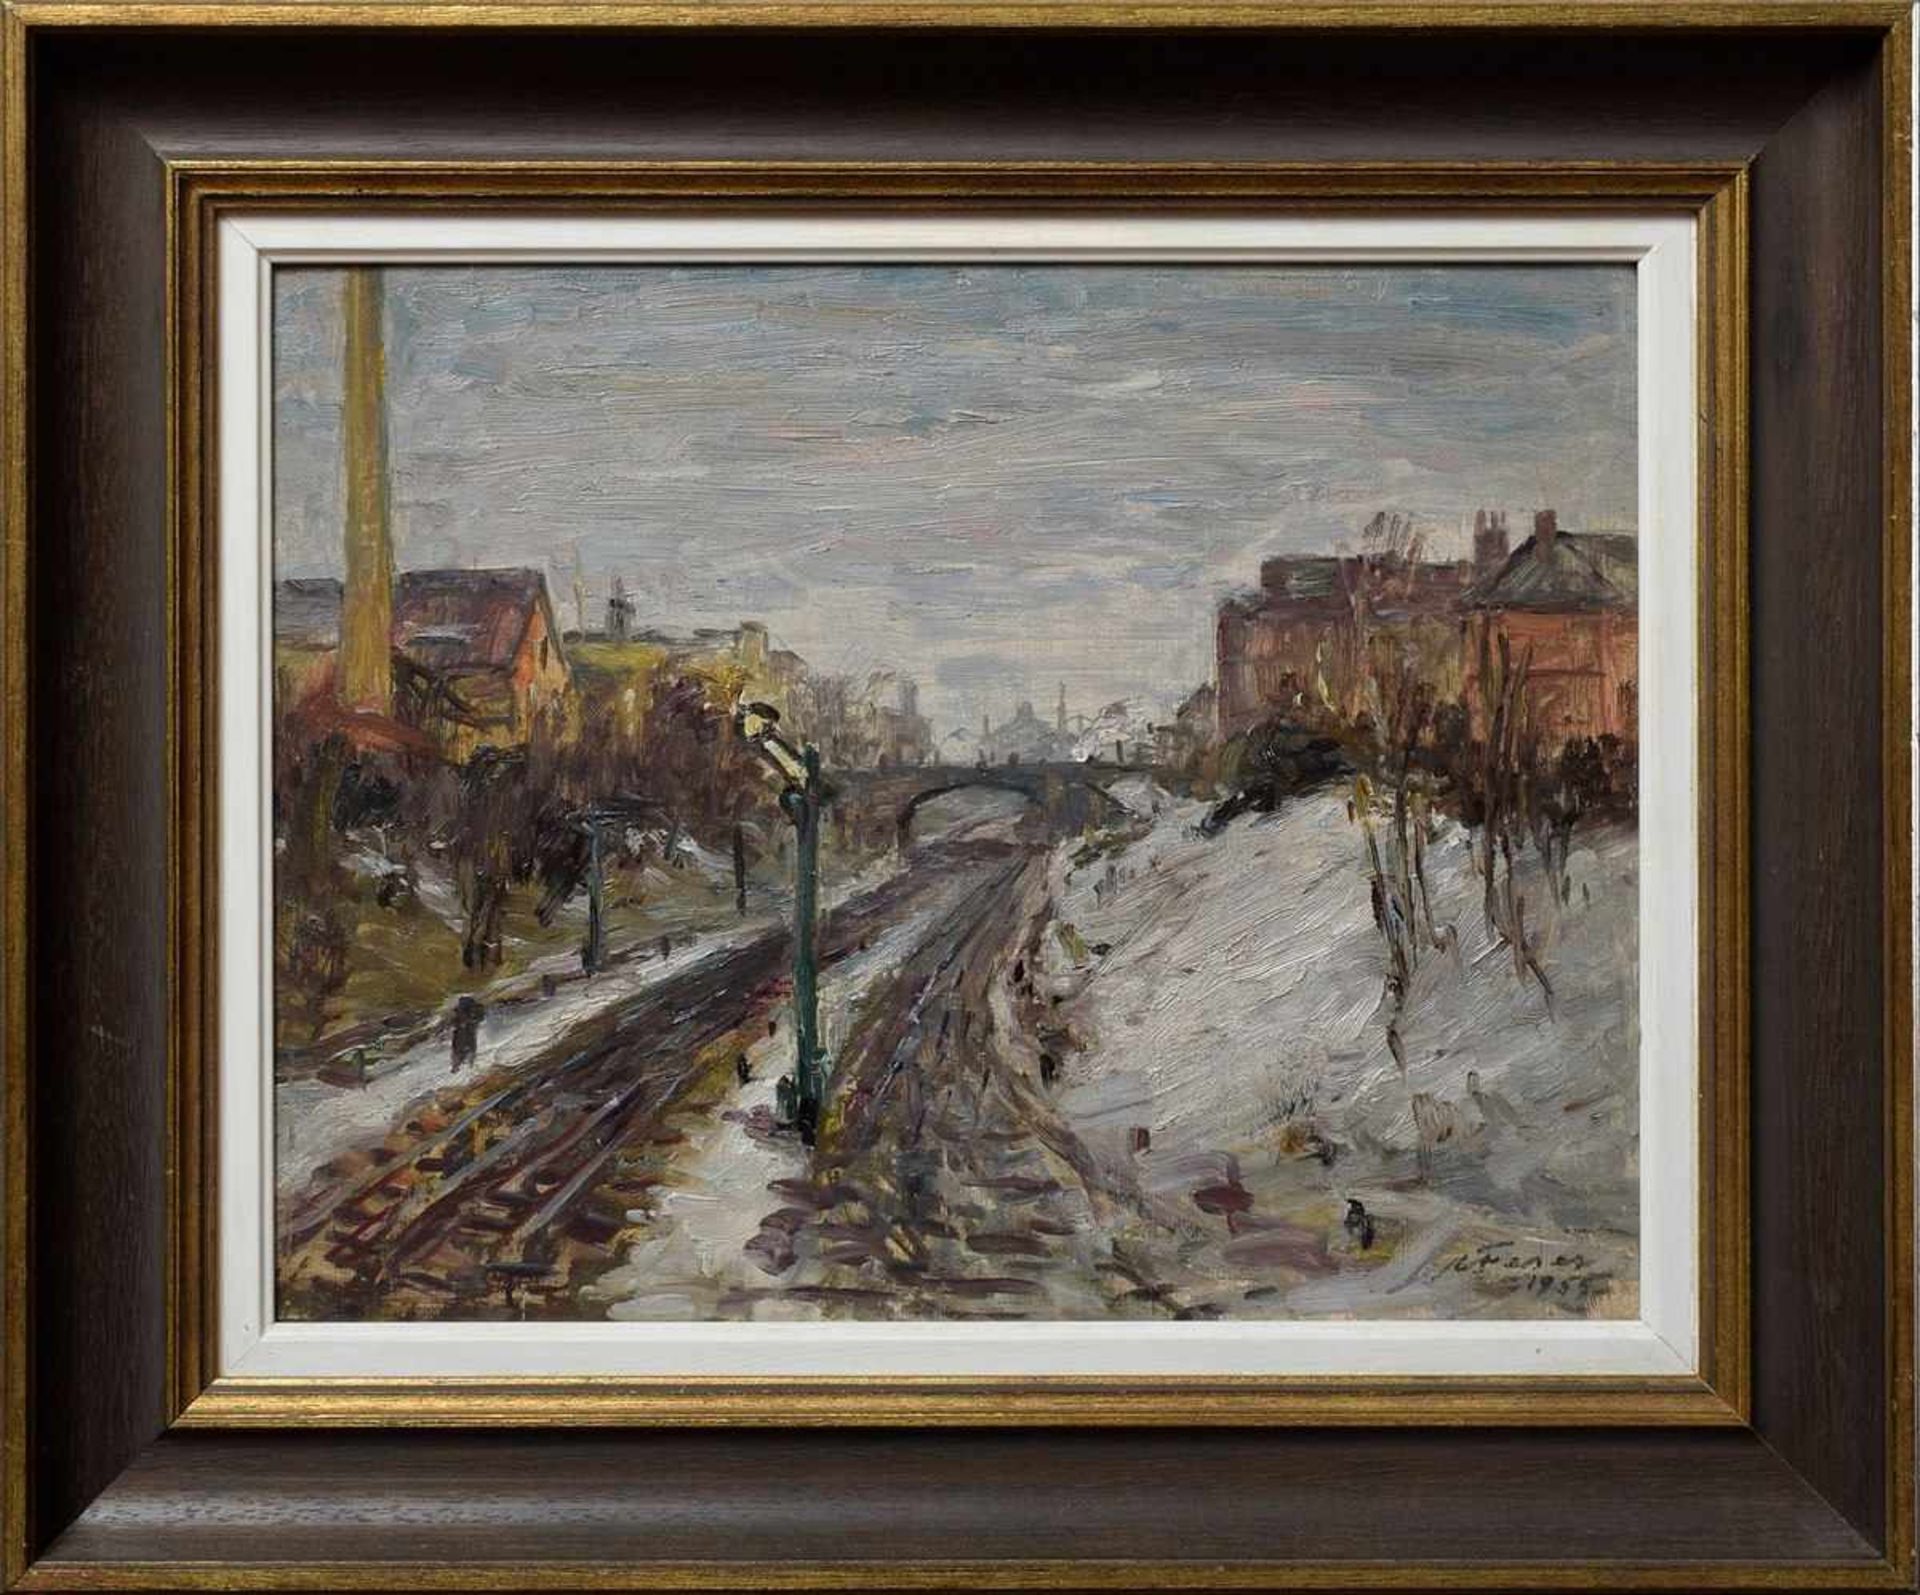 Feser, Albert (1901-1993) "Borgfelde S-Bahn" 1955, oil/wood, signed and dated below right, - Image 2 of 4